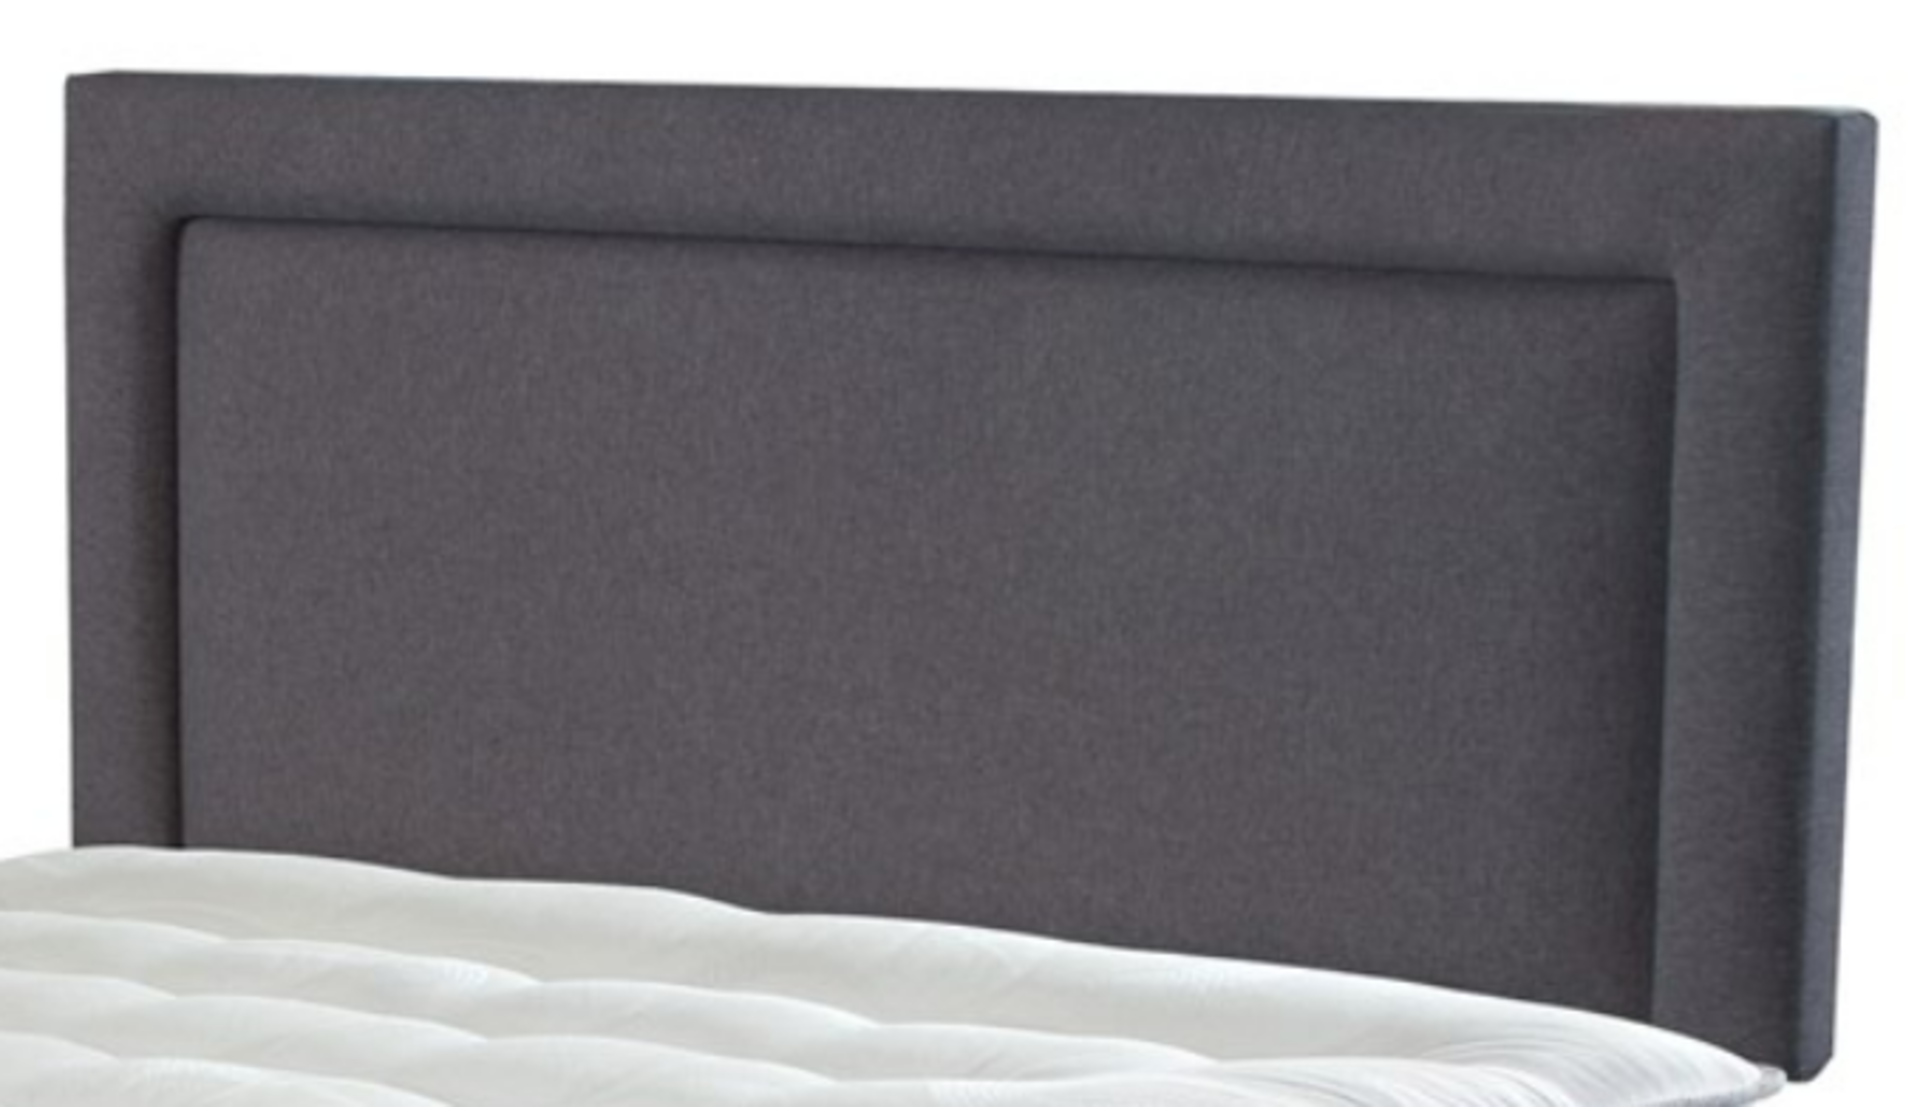 Carpetright Sleepeeze Florida 5Ft King Size Headboard In Noir RRP Â£299.00 - This item looks to be